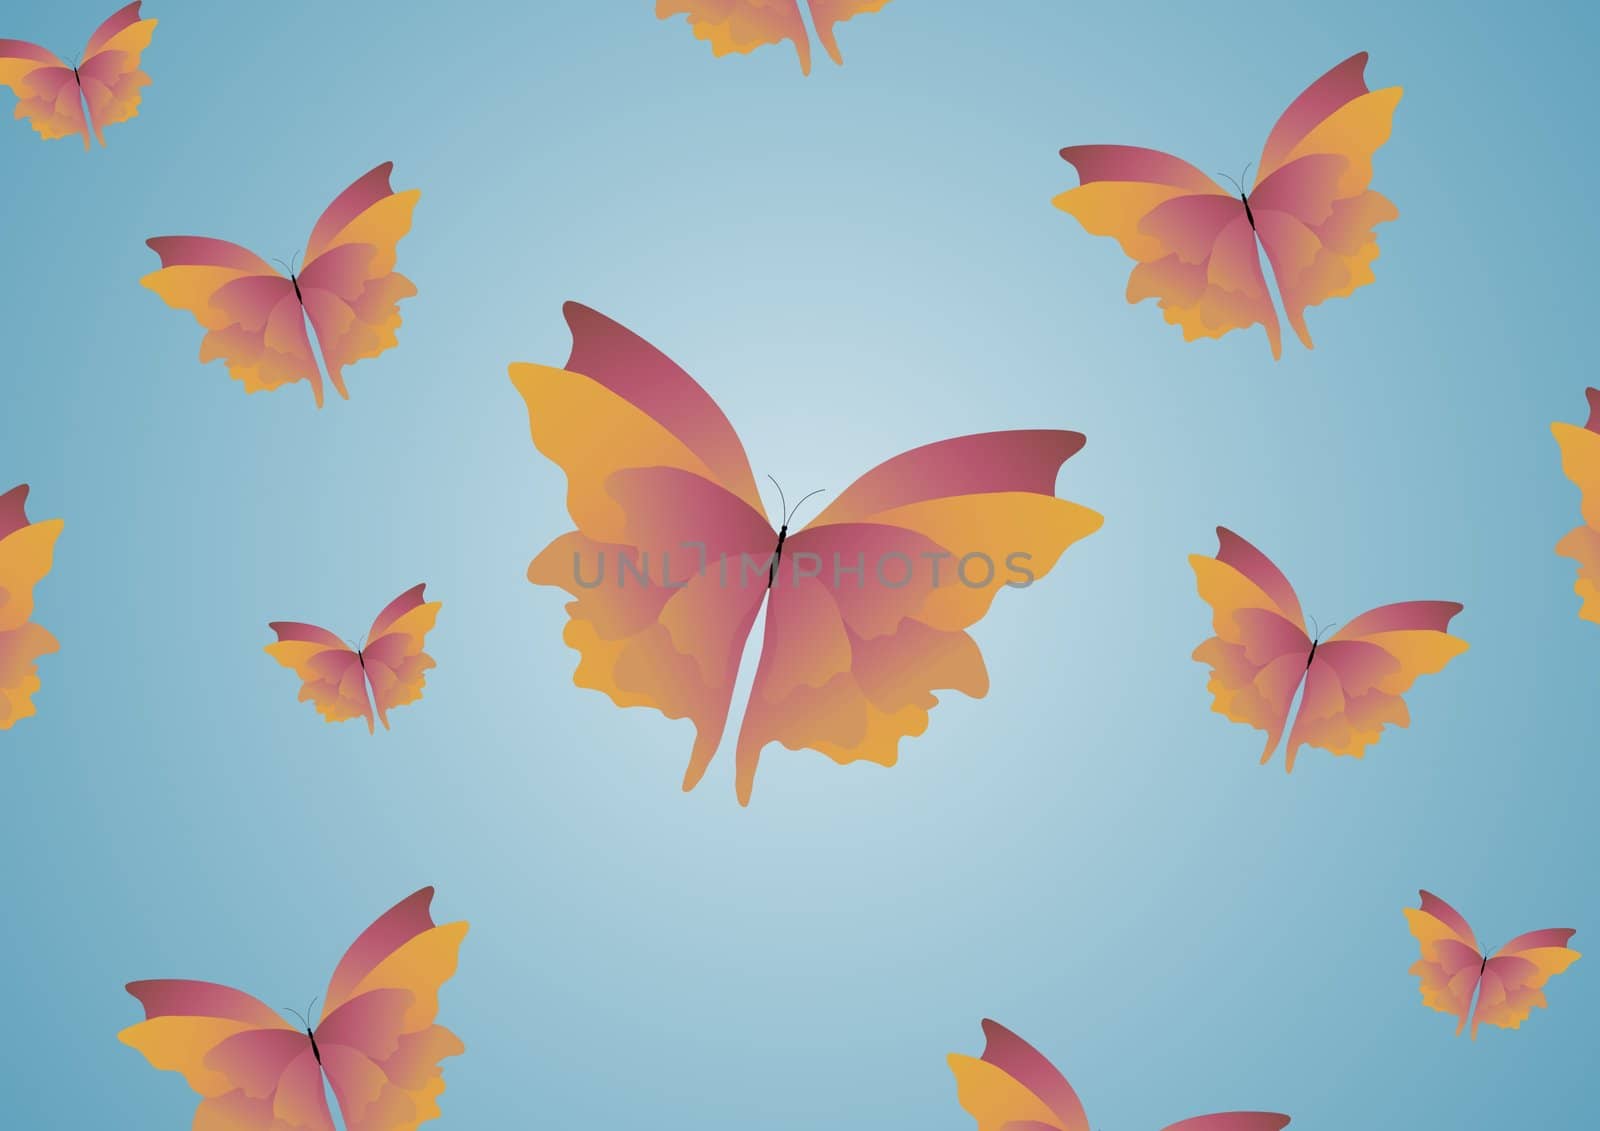 Illustration of butterflies over a blue background